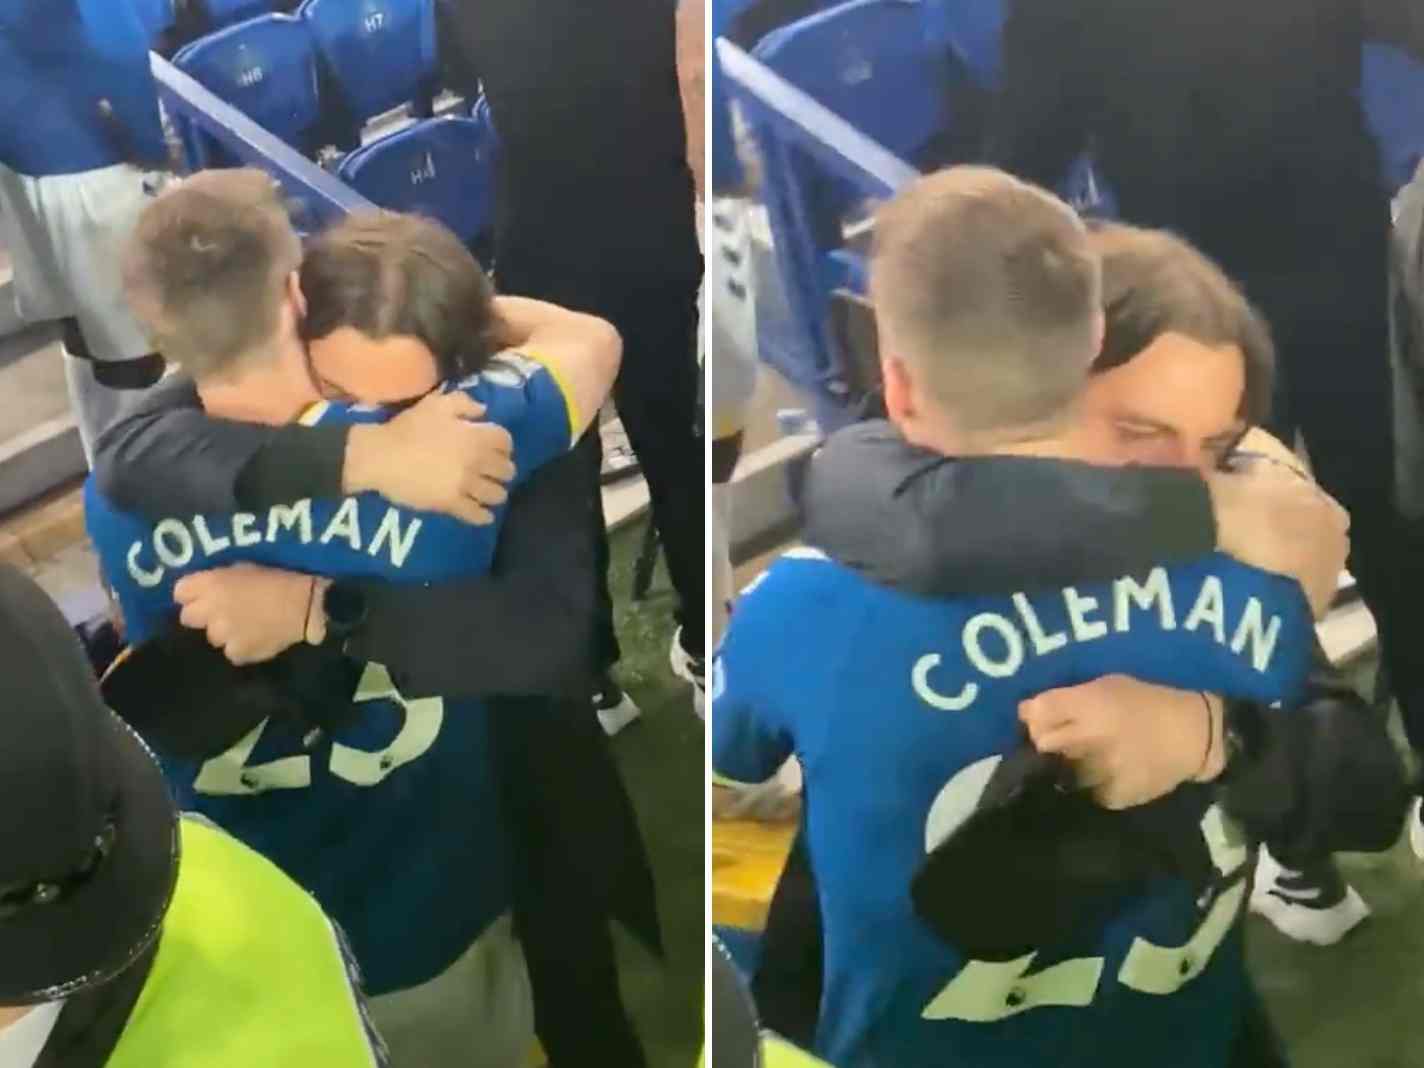 The photo shows Seamus Coleman and Leighton Baines embracing each other after Everton's 3-2 win over Crystal Palace.